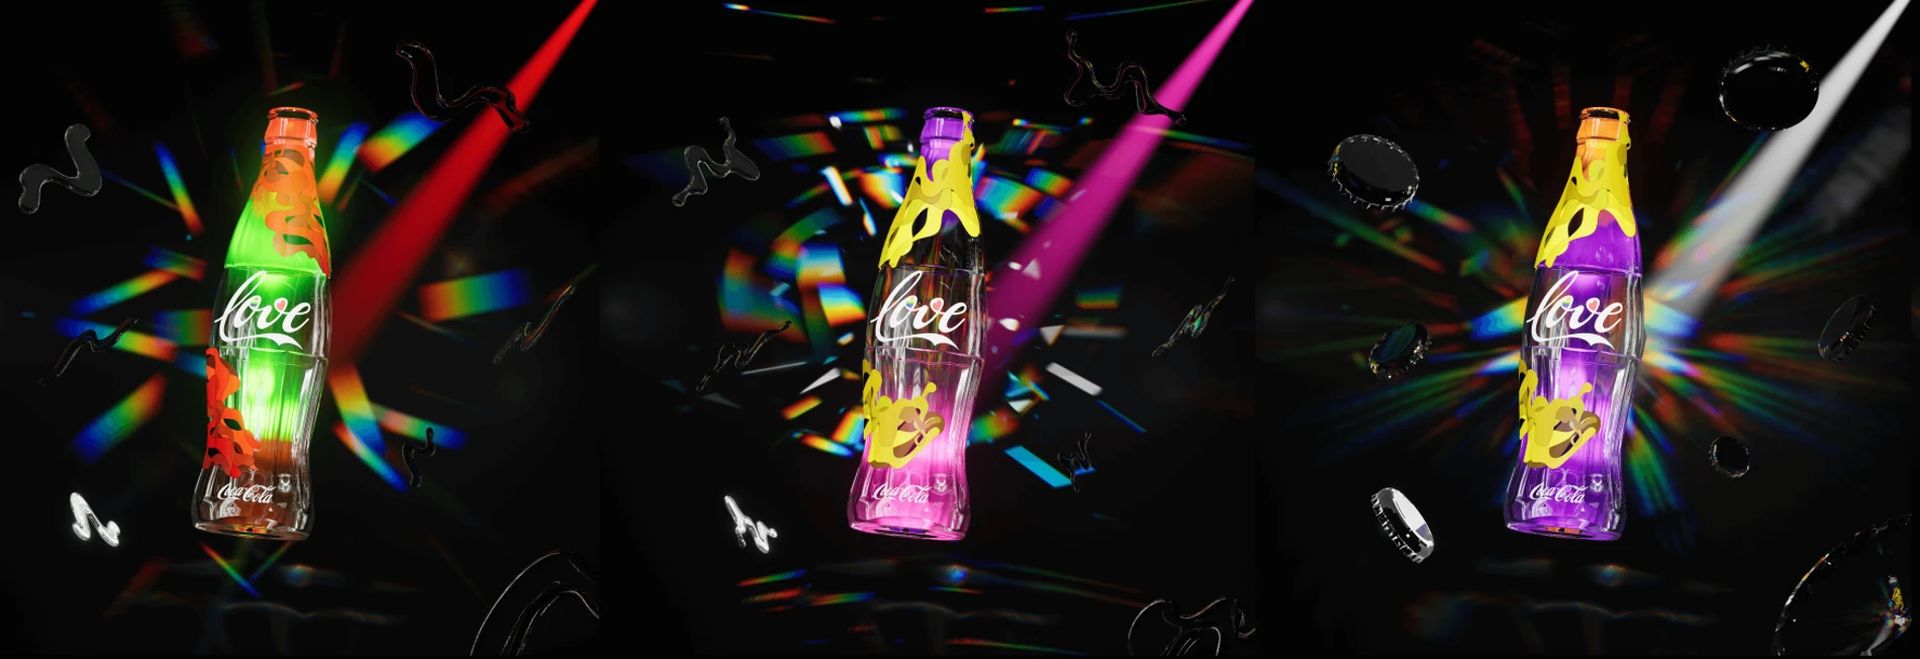 The Coca-Cola NFT collection is now available on OpenSea. To commemorate Pride Month, the company has released 136 digital collectibles, with all proceeds going to LGBTQIA+ charity.